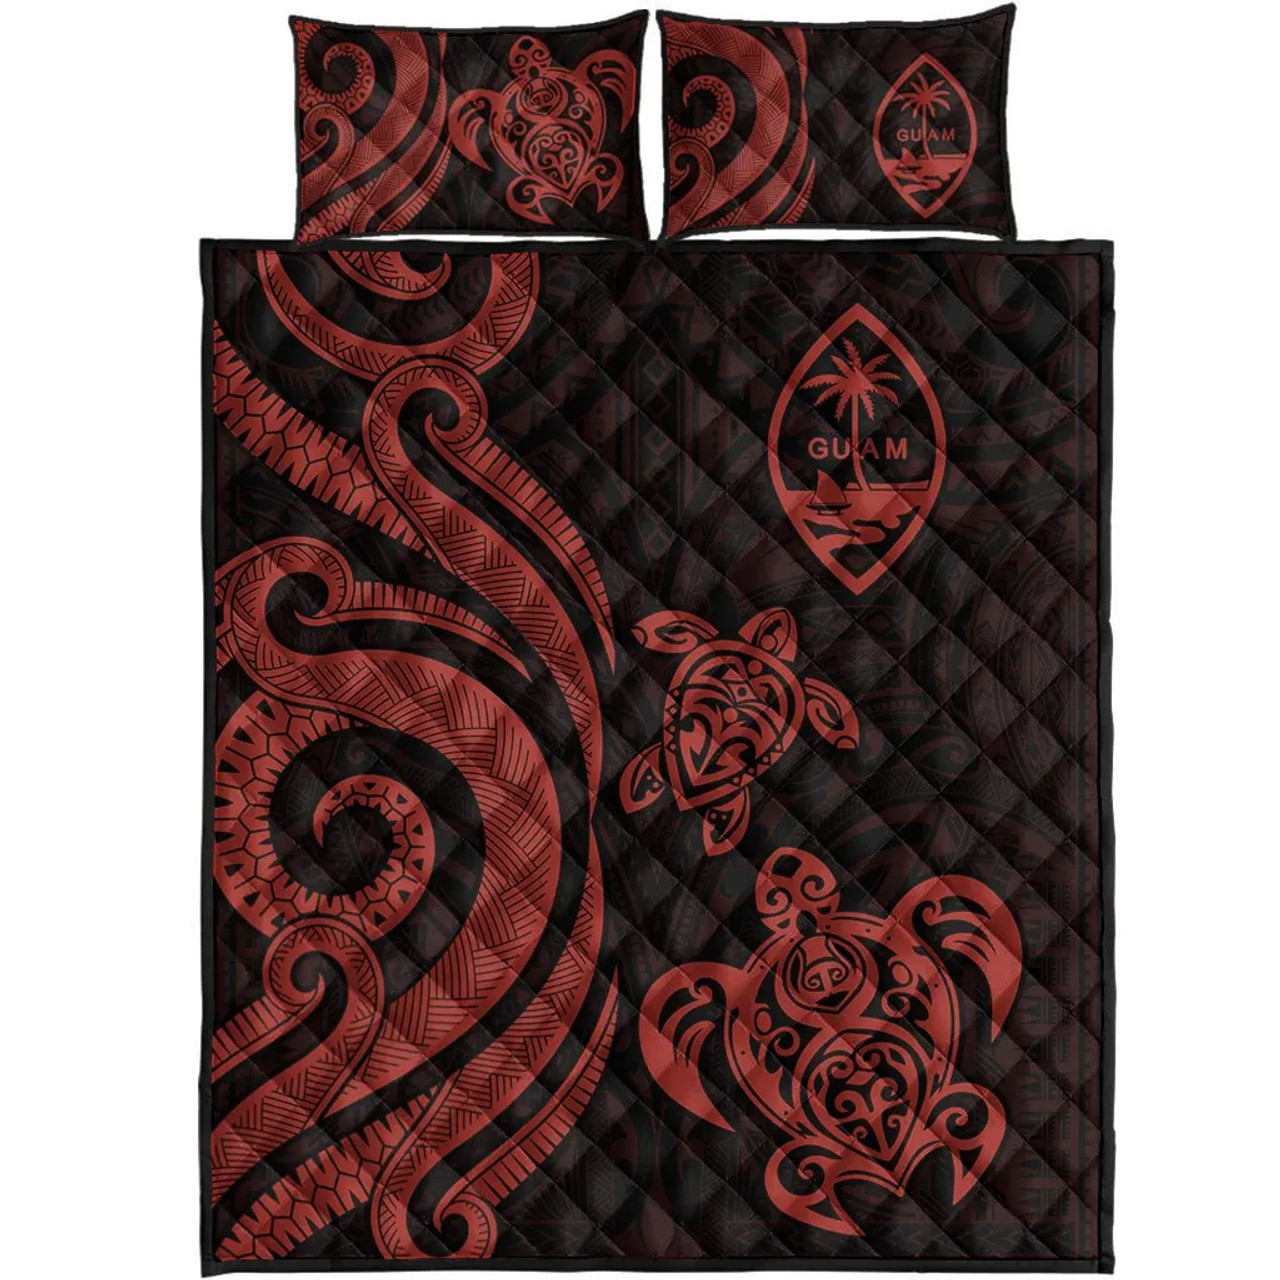 Guam Quilt Bed Set - Red Tentacle Turtle 5